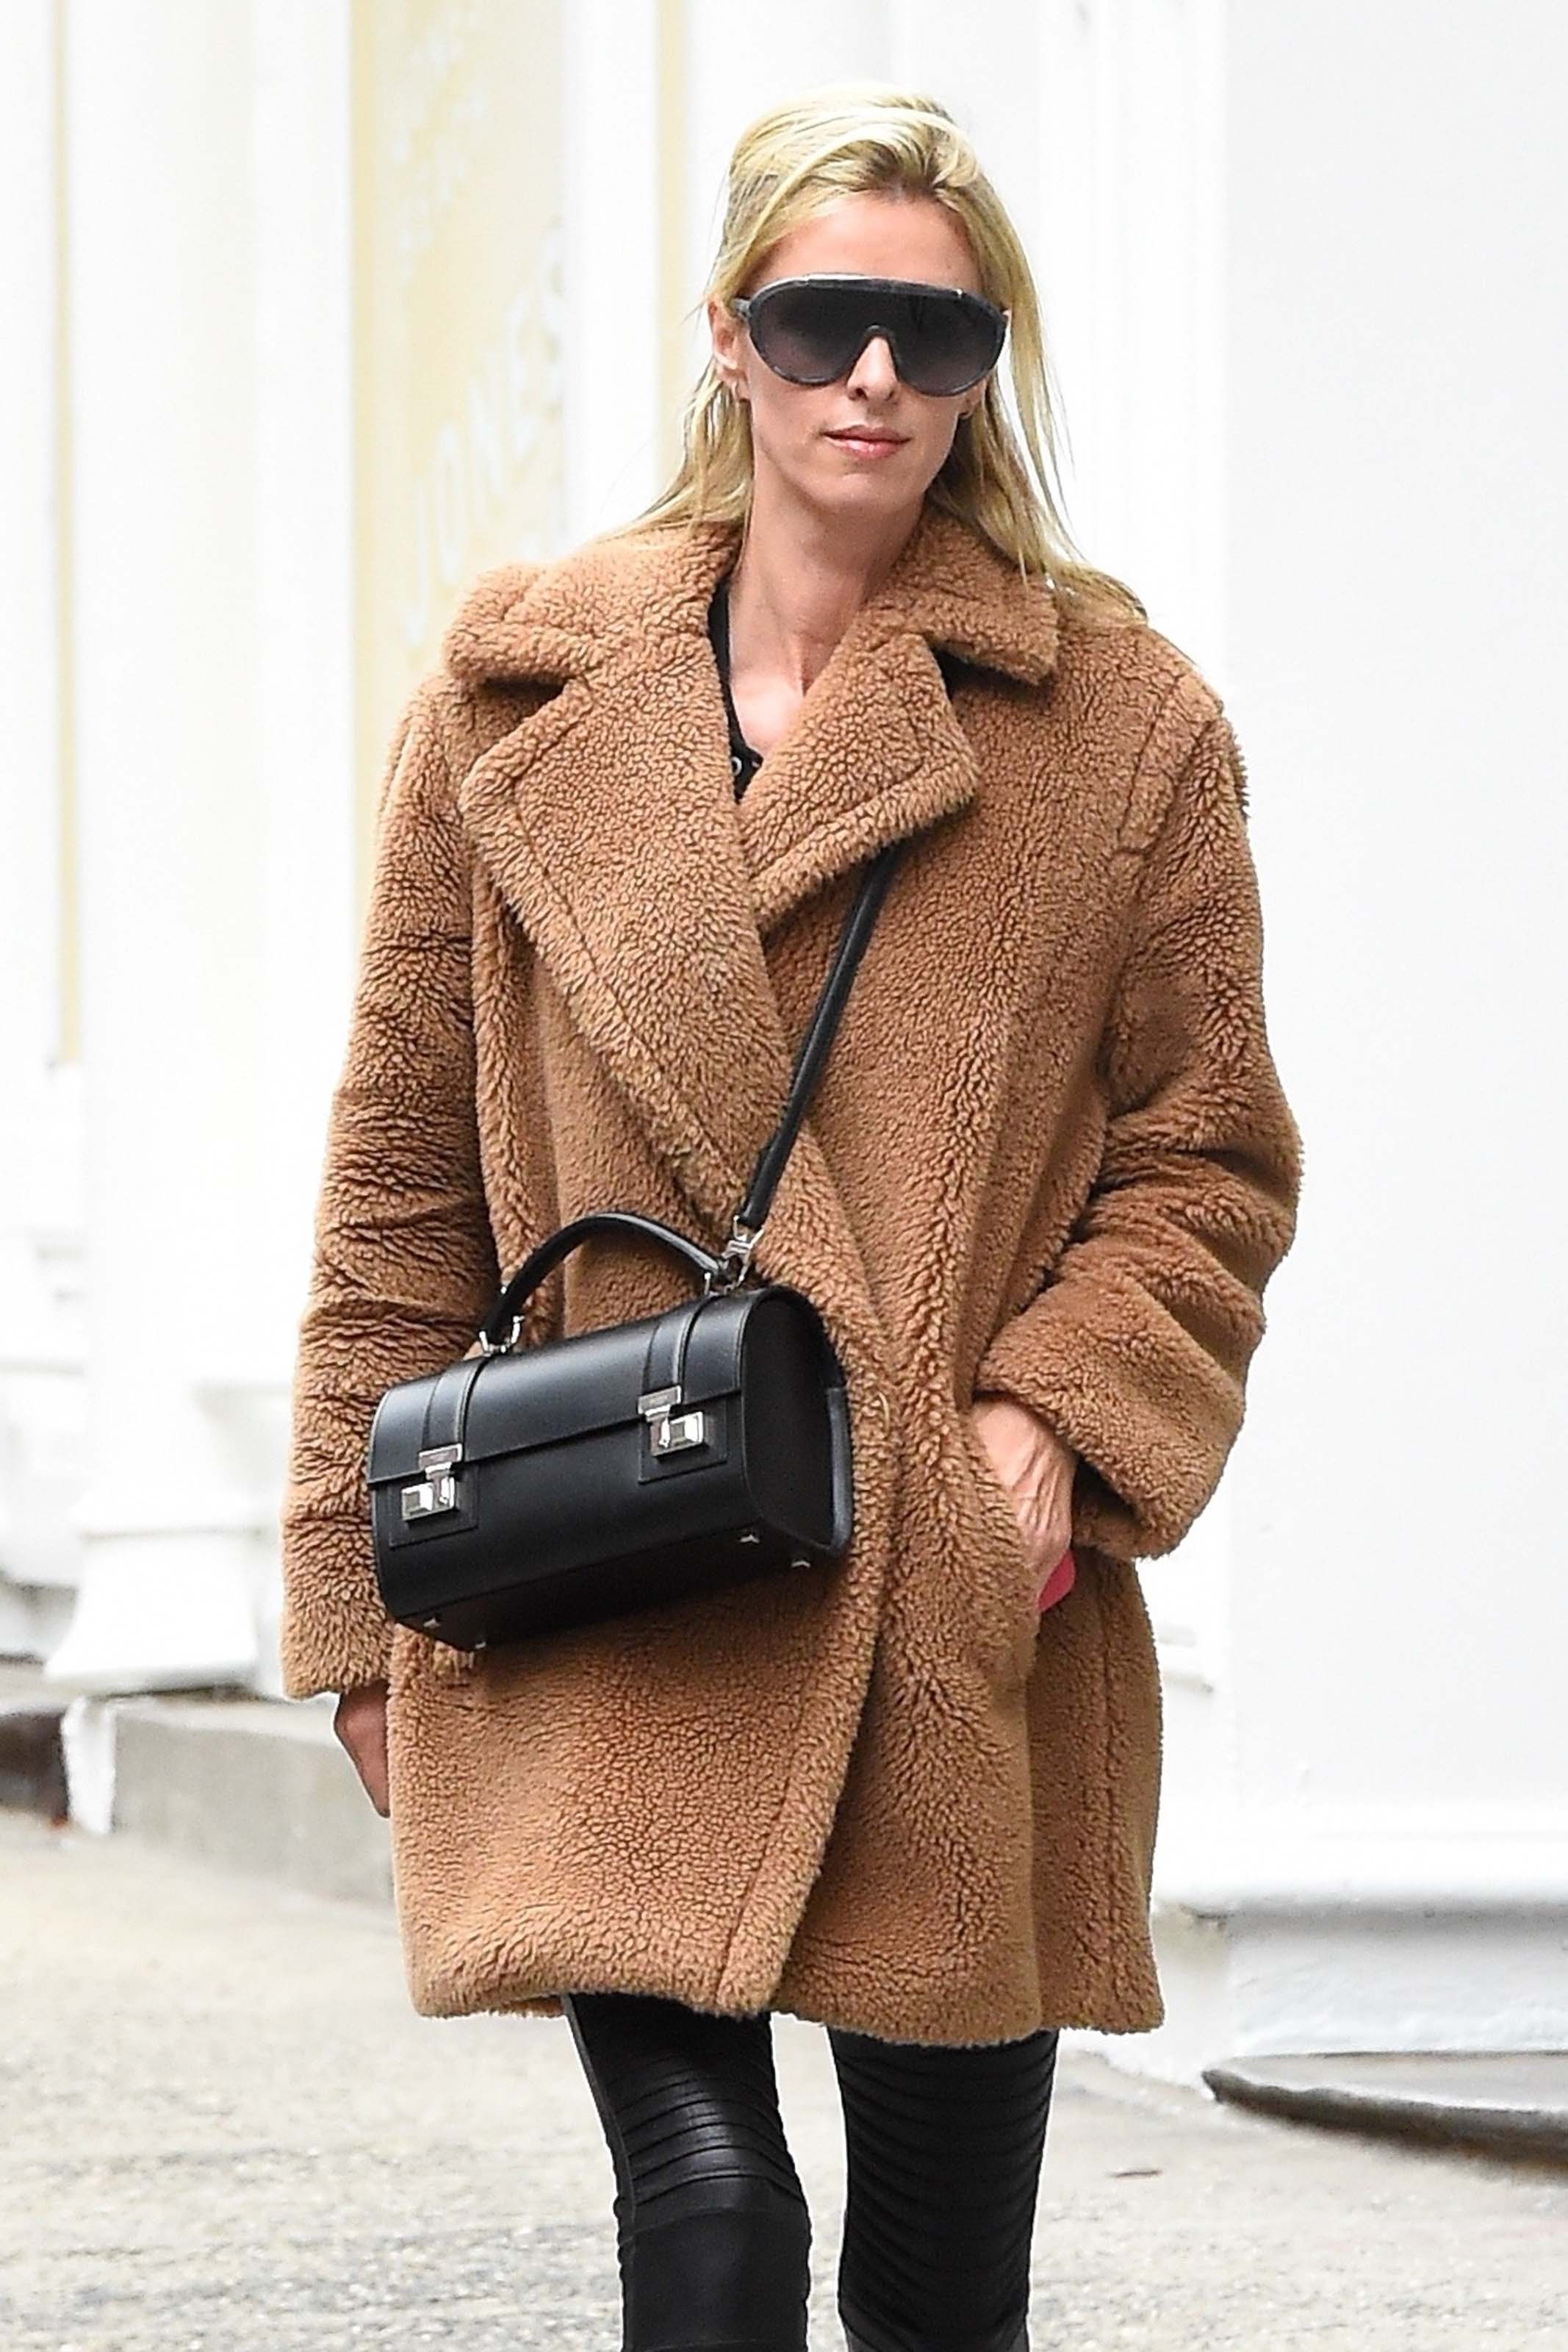 Nicky Hilton out in NYC